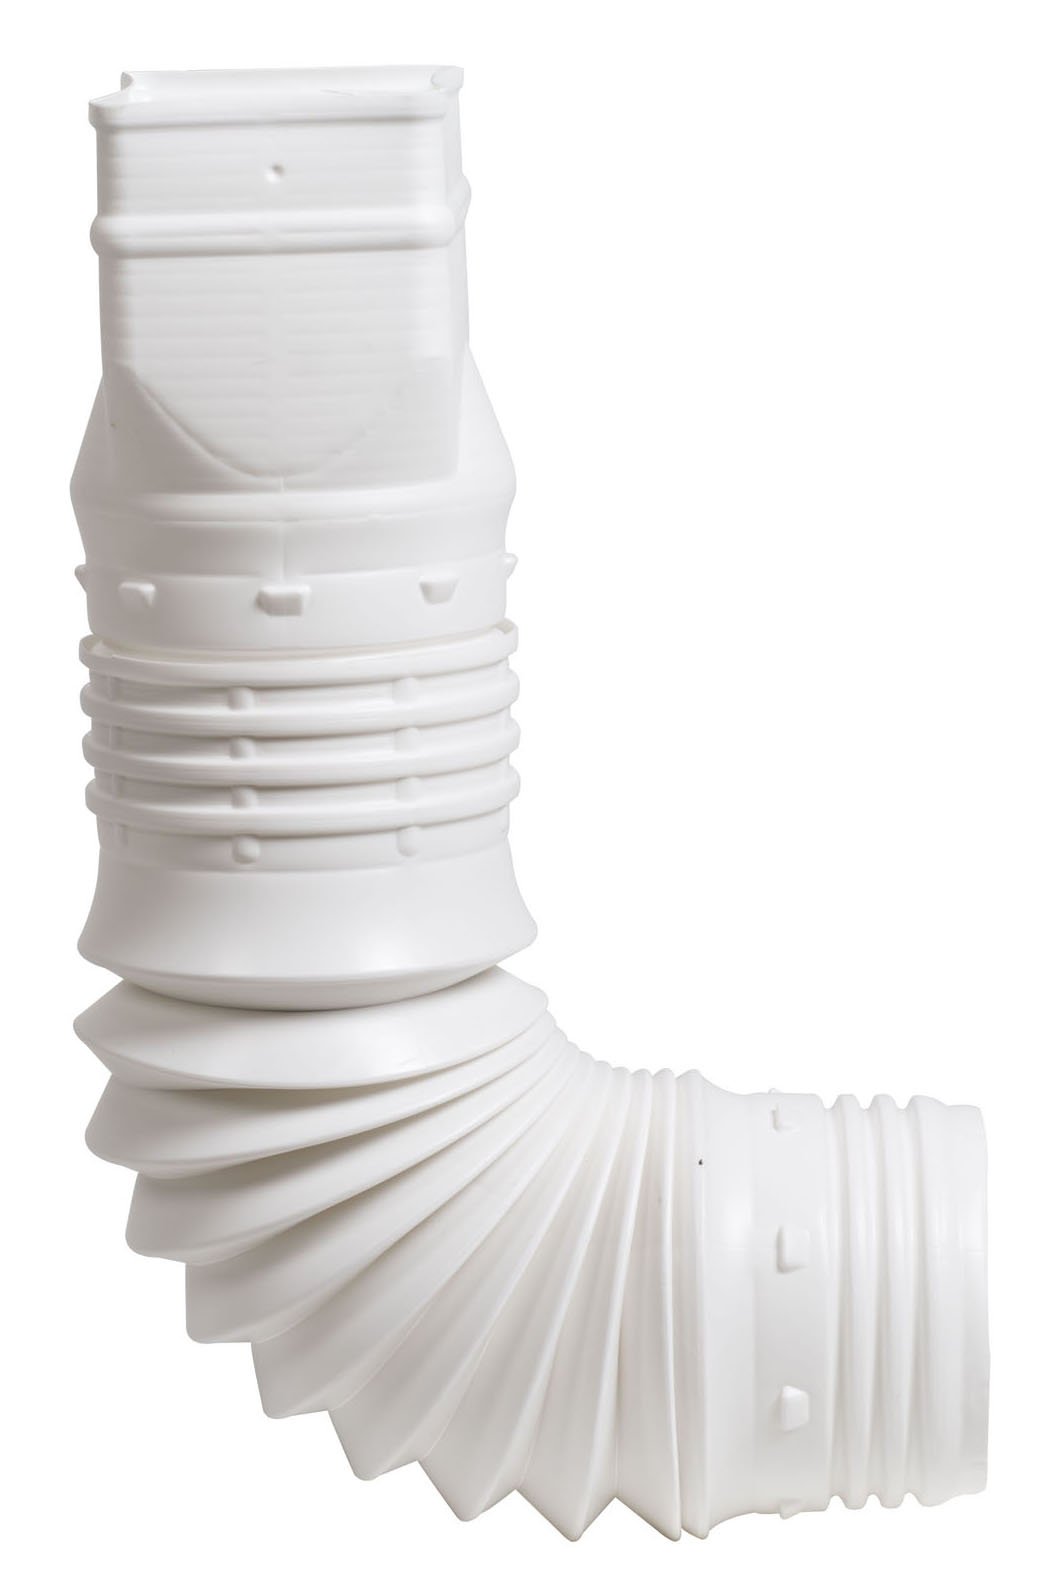 Flex-Drain 53127 Flexible Downspout Extension Adapter, 3 by 4 by 4-Inch, White